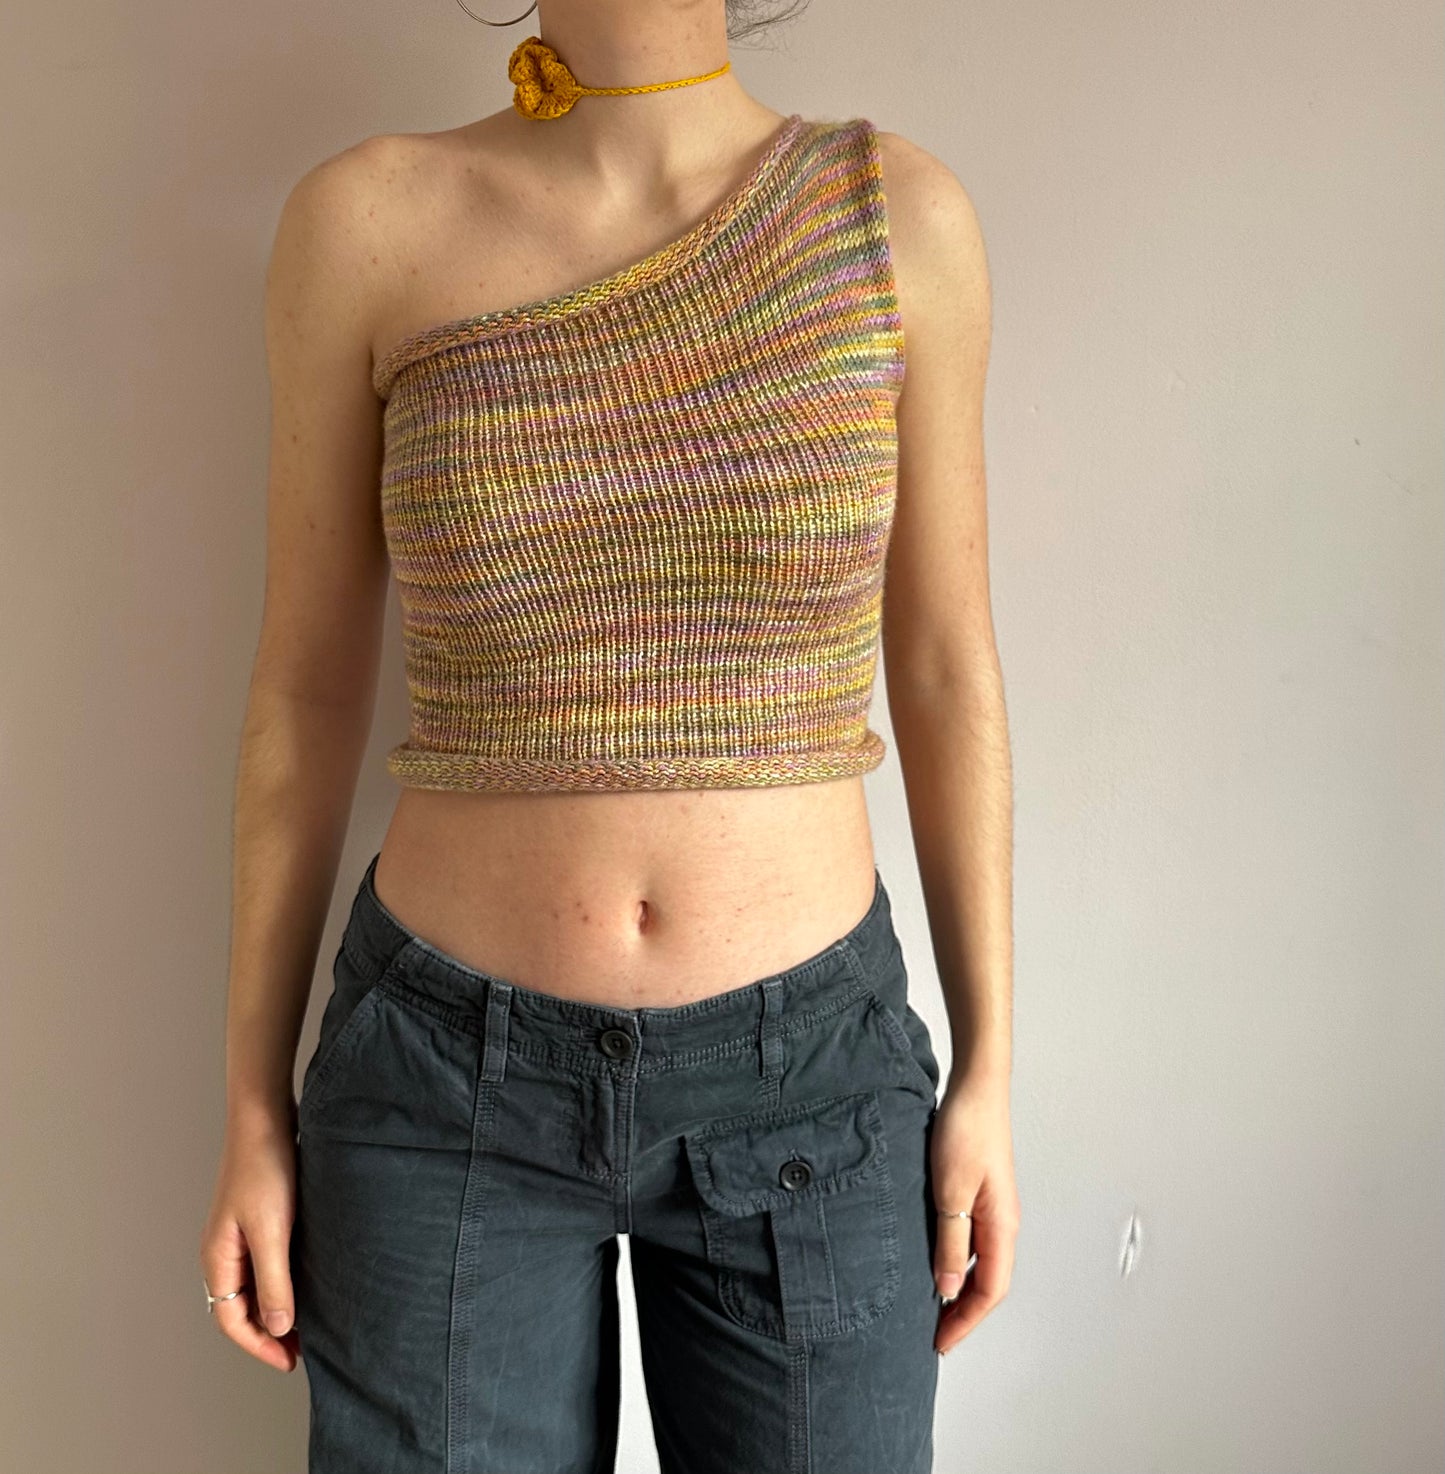 Handmade knitted one shoulder asymmetrical top in subtle earth tones